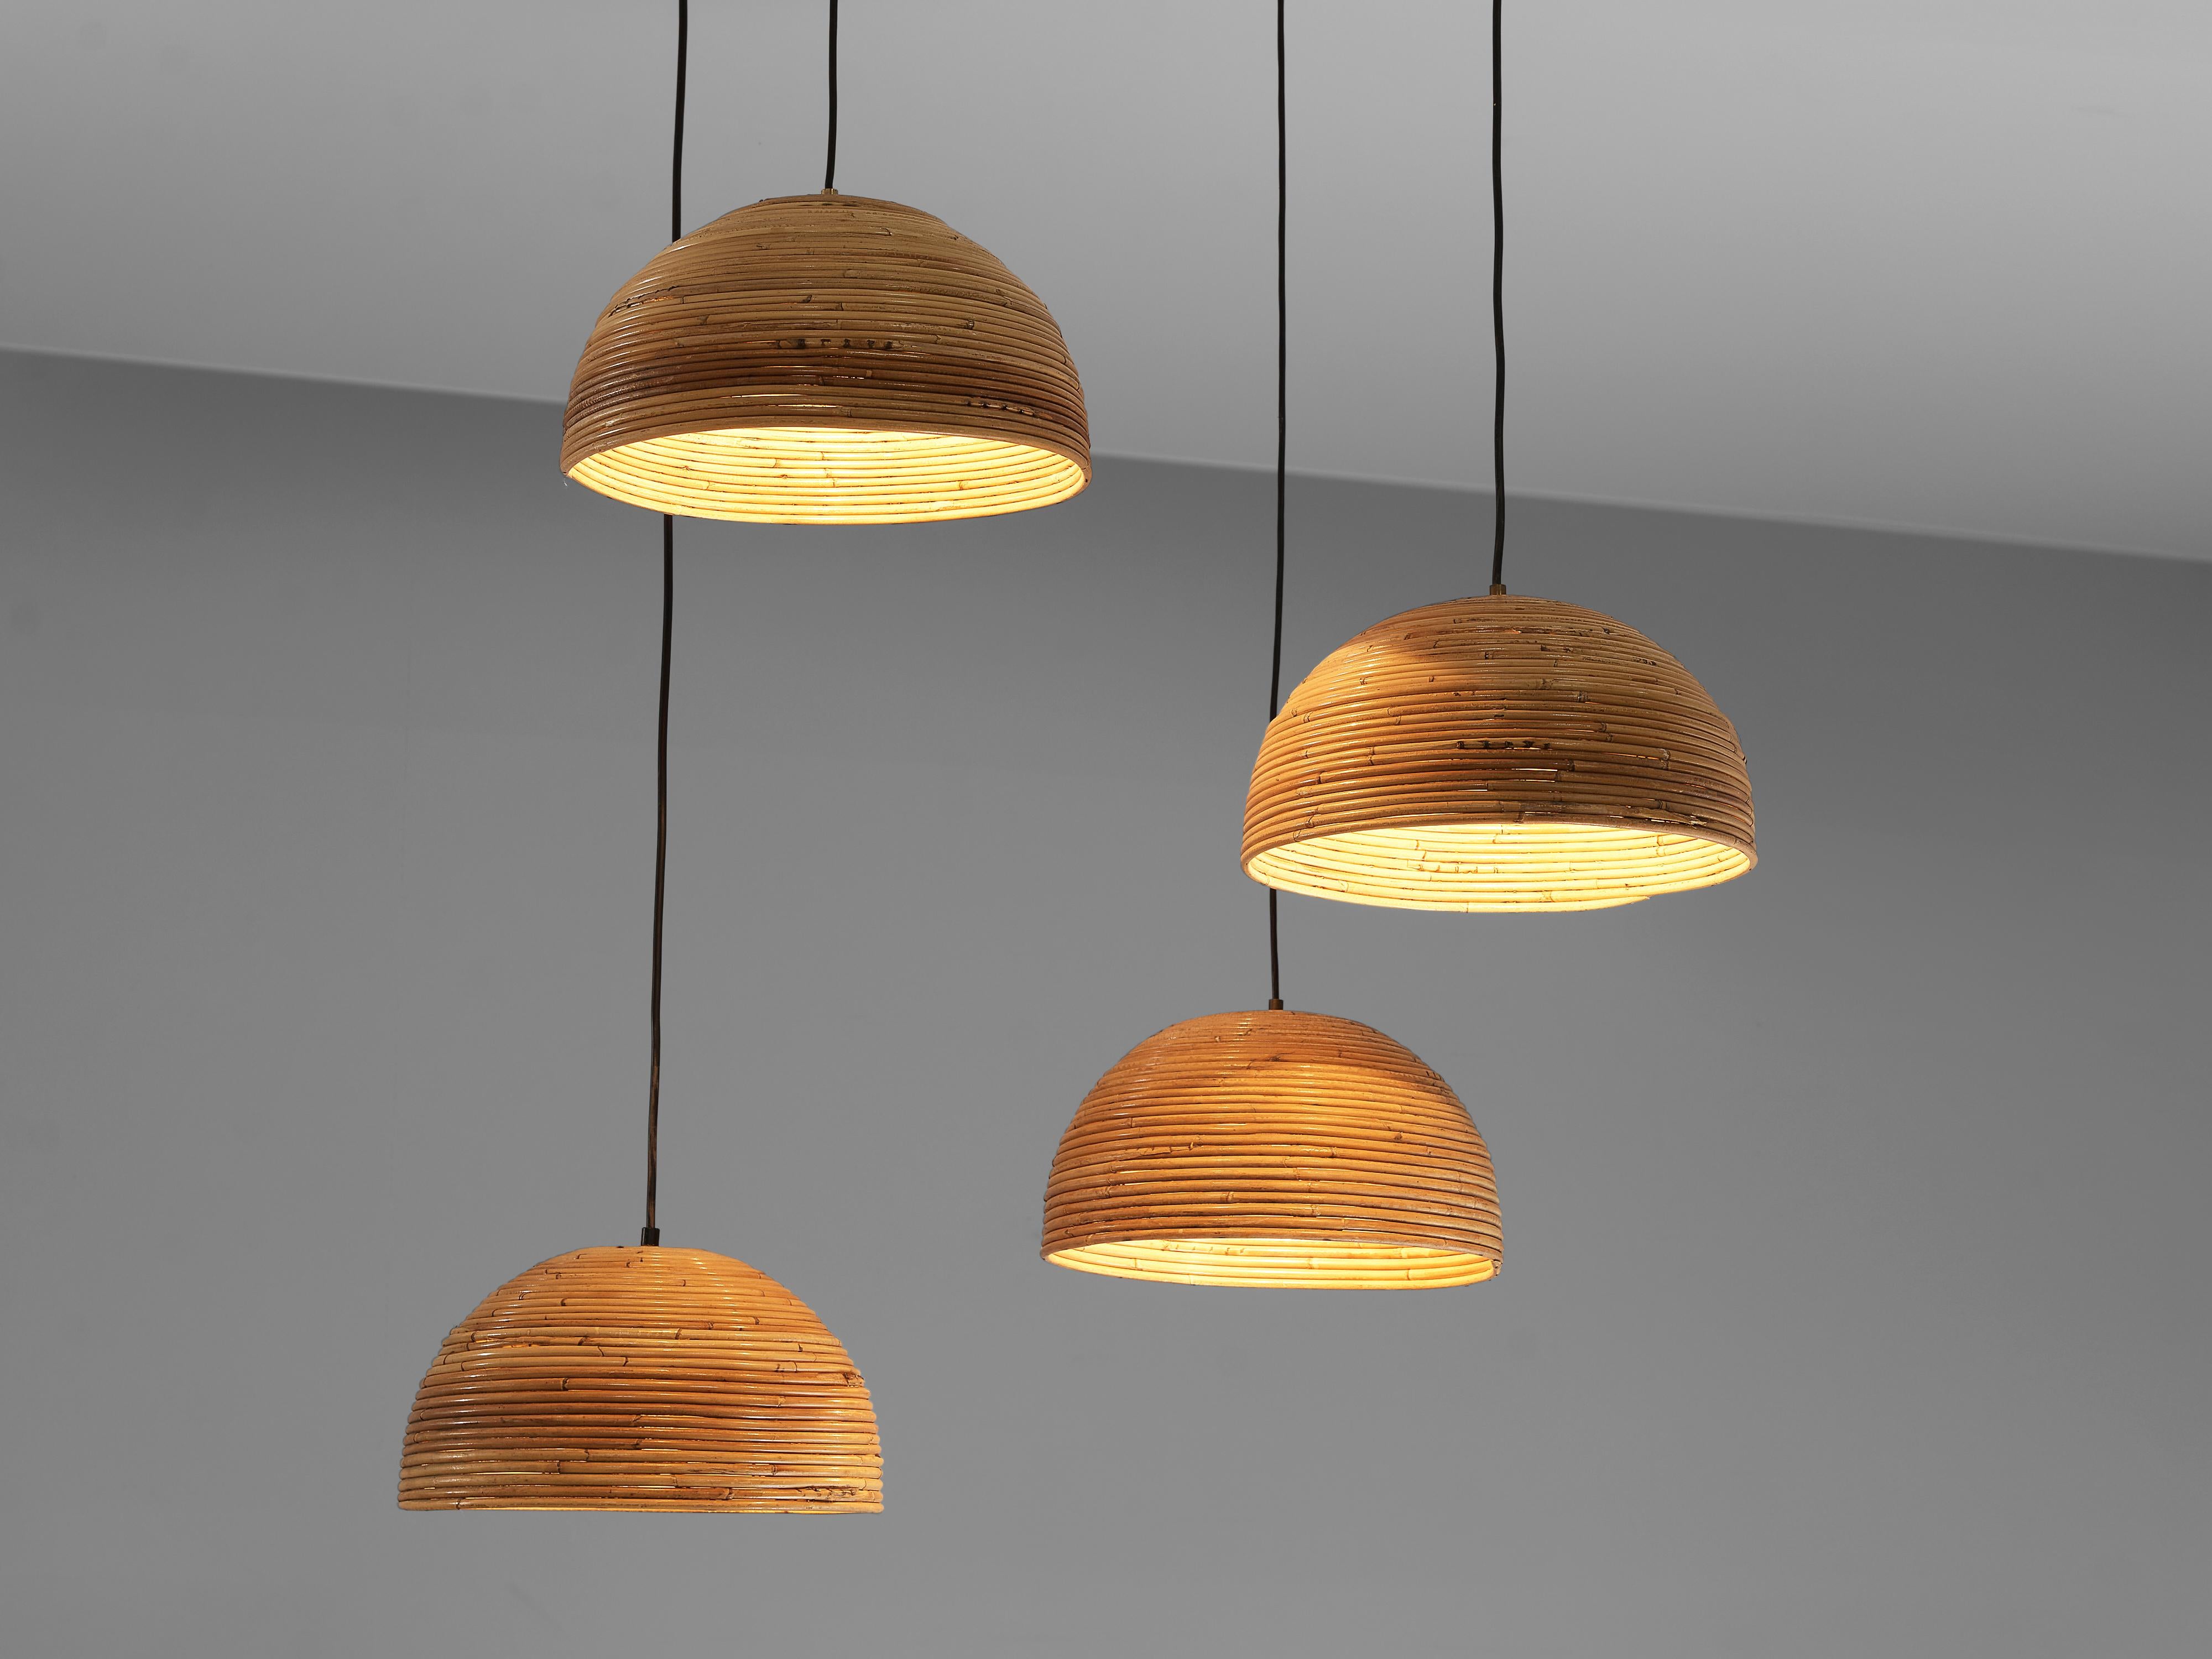 Dome pendants, bamboo bentwood, brass, Europe, 1960s

These pendants are made of bentwood bamboo which is layered horizontally and forms a dome shape light. The warm color of the natural material presents a soft lighting indoors as well as in